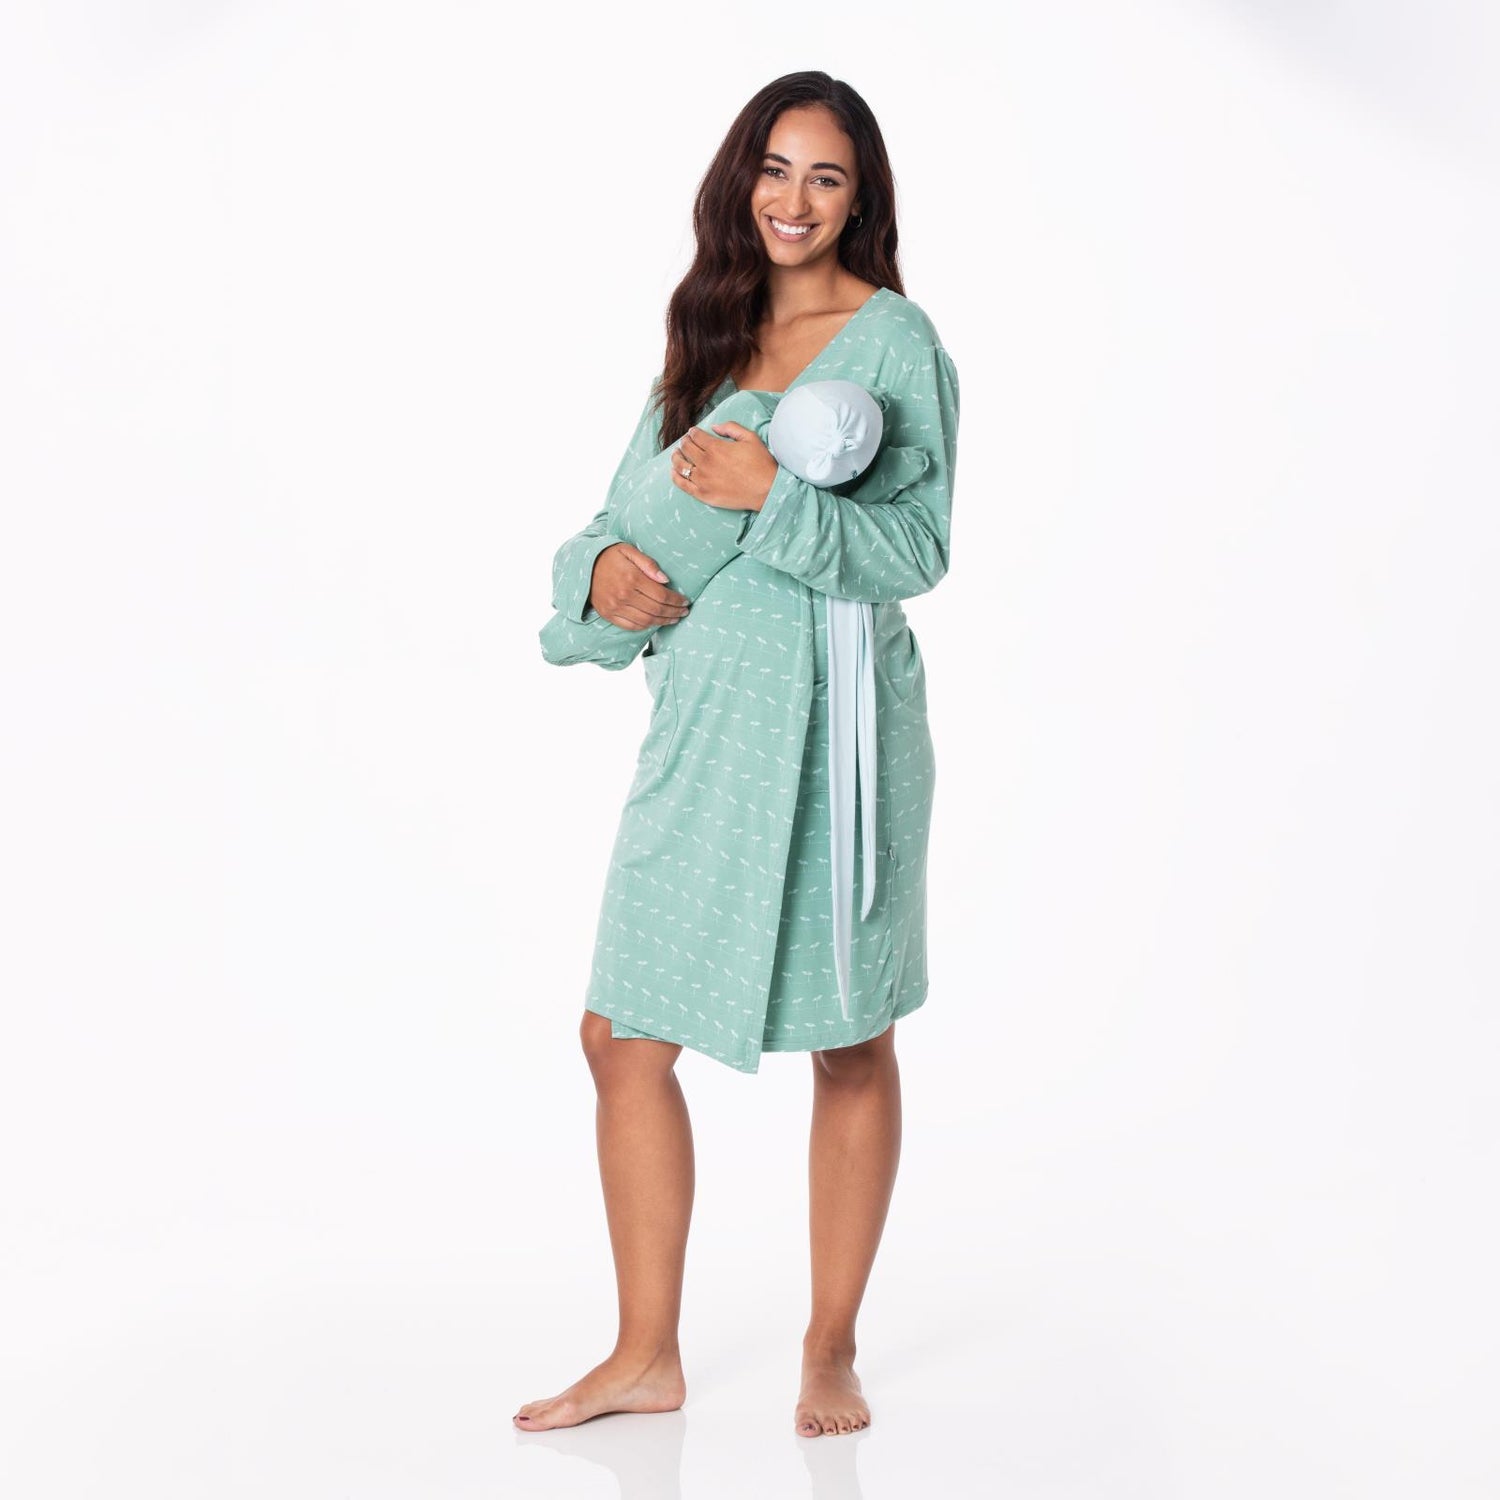 Women's Maternity/Nursing Robe & Layette Gown Set in Shore Sprouts